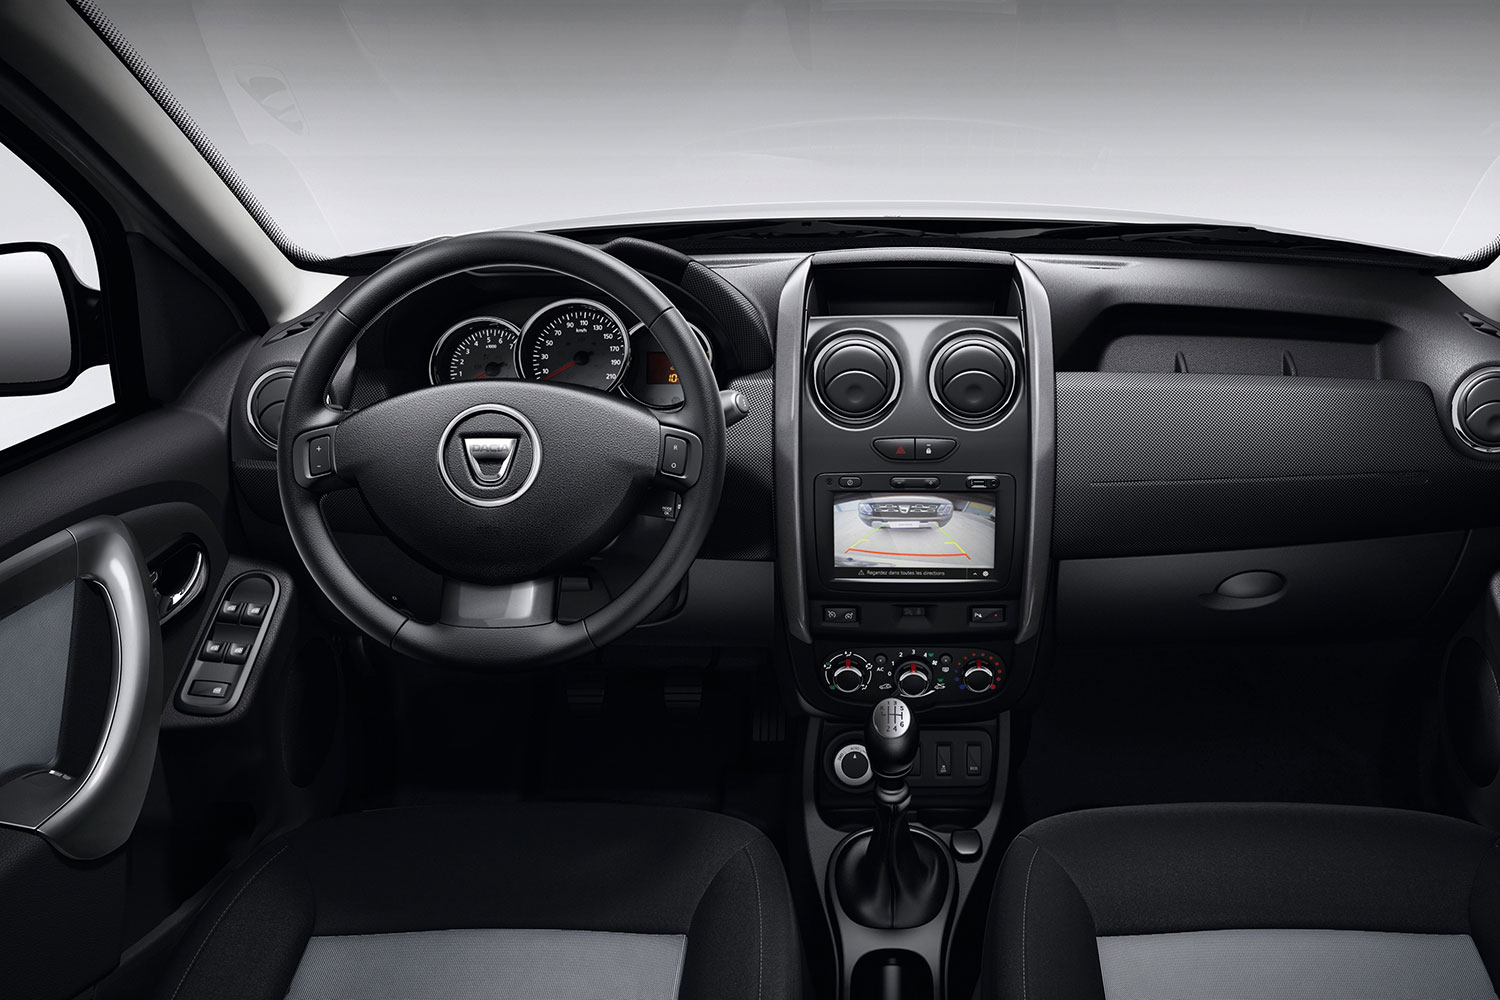 romanias dacia keeps things simple at frankfurt with small tech upgrades 71162 global en